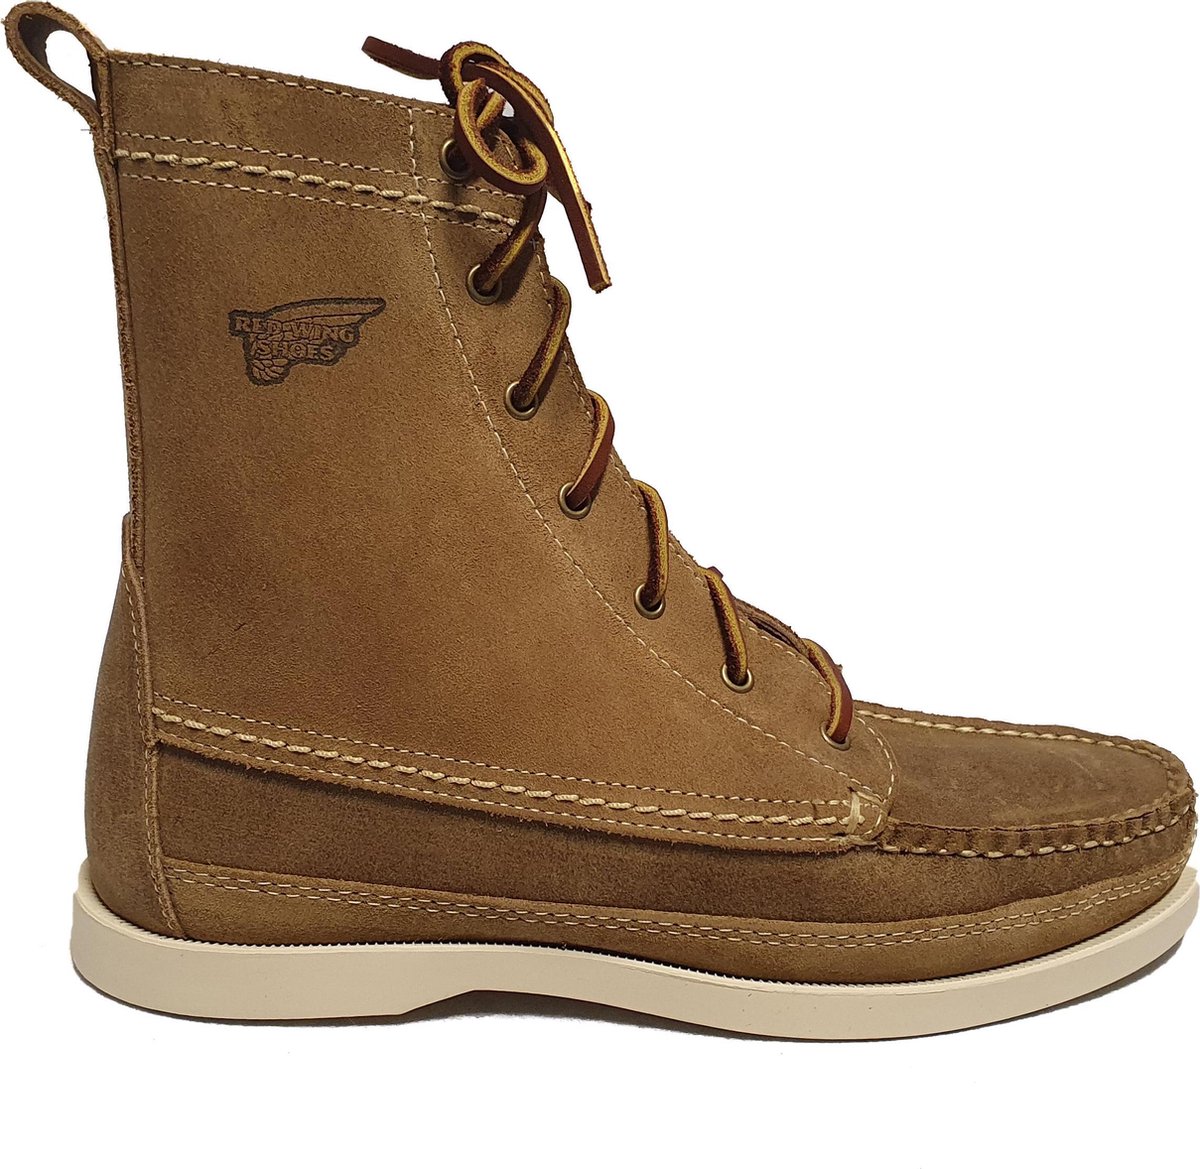 Red Wing Wabasha Boat Boot Suede 07190 Camel EU 39